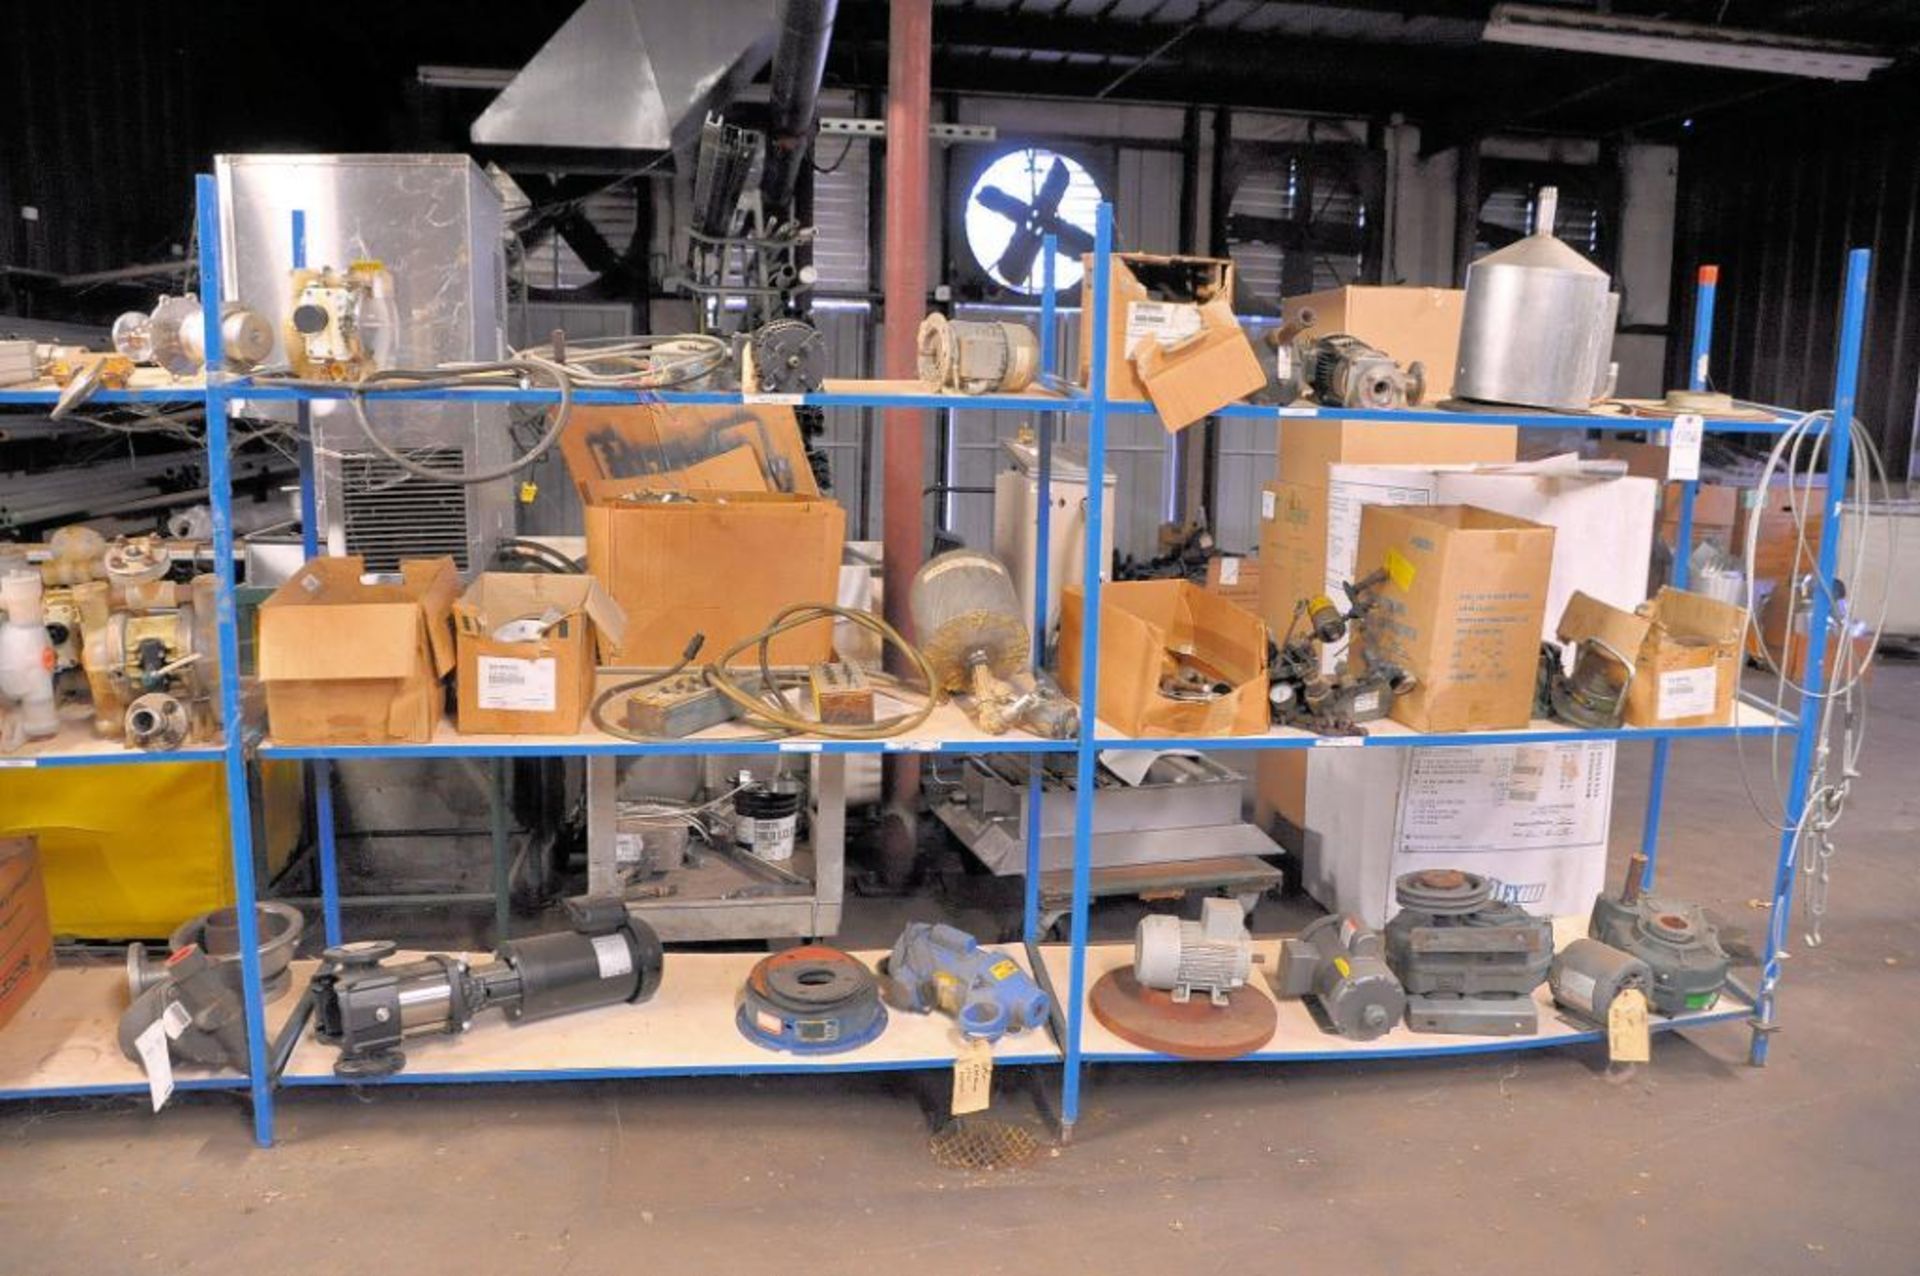 Lot - Pumps, Diaphragm Pumps, Motors, Ice Machine, Drinking Fountain, Pipe Clamps and Exhaust Fan - Image 3 of 5